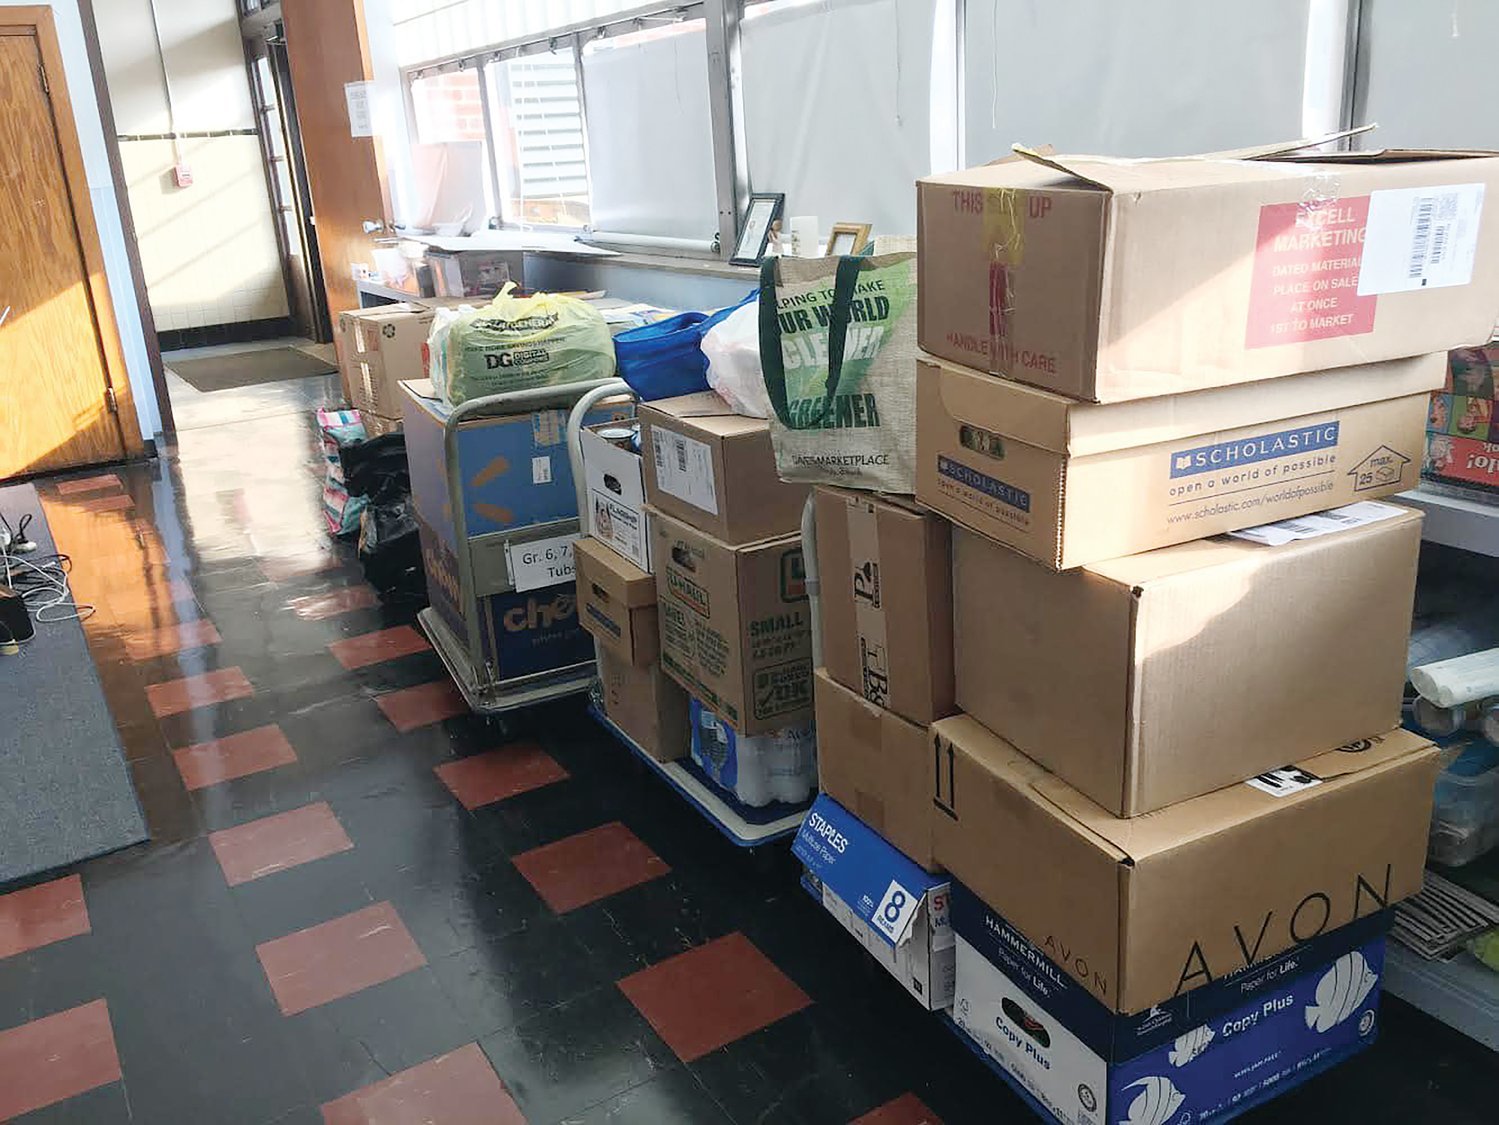 In March, the school community of St. Teresa in Pawtucket collected food and clothing for the homeless.